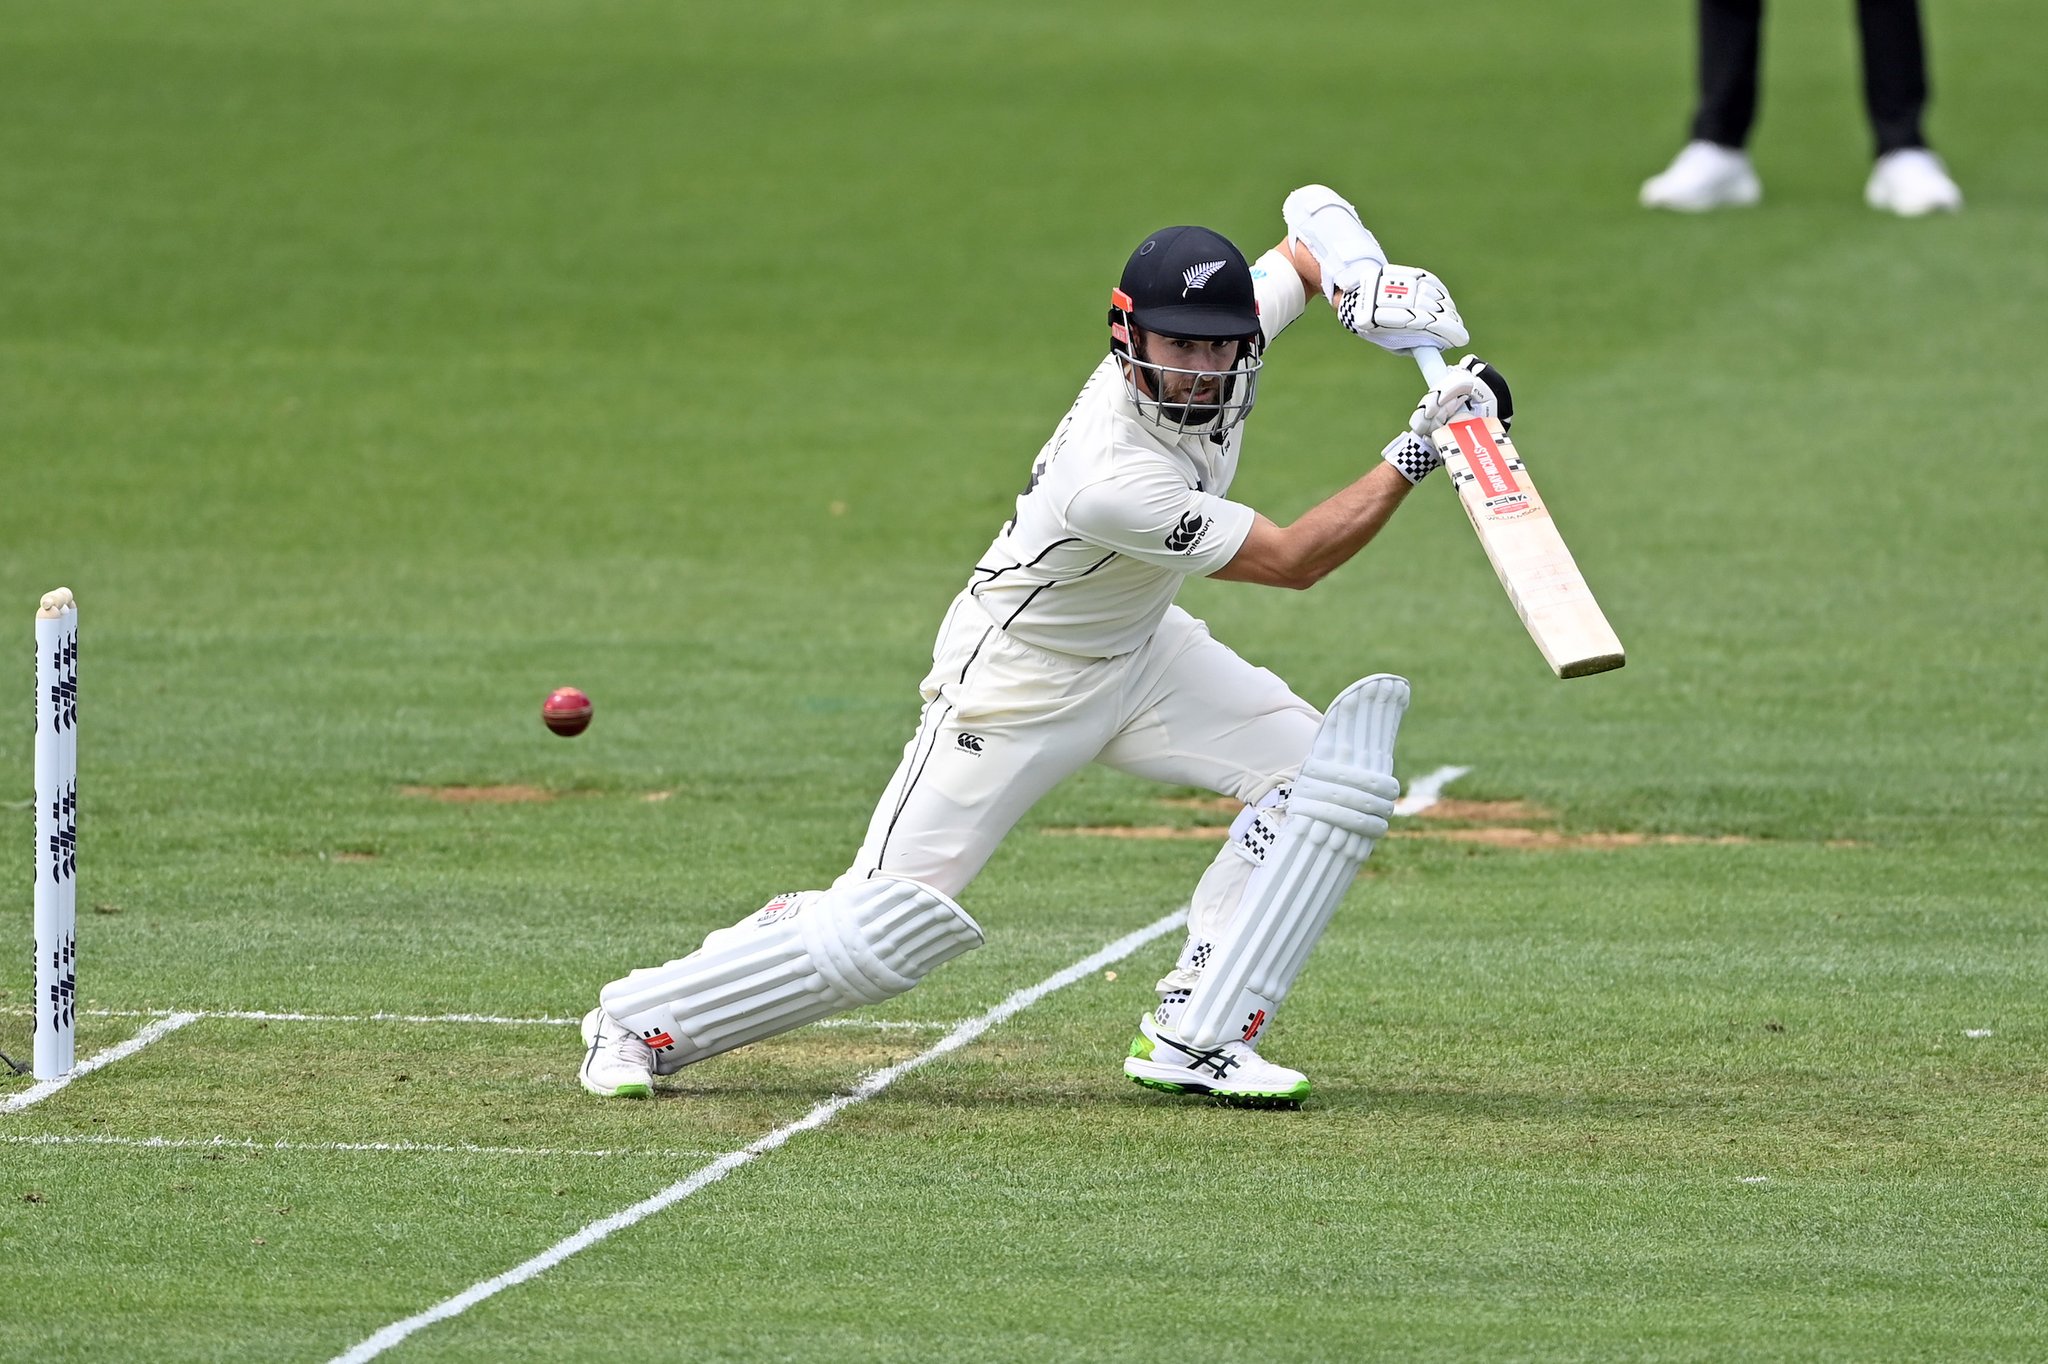 Kane Williamson calls ICC World Test Championship points ‘a carrot’ to win matches